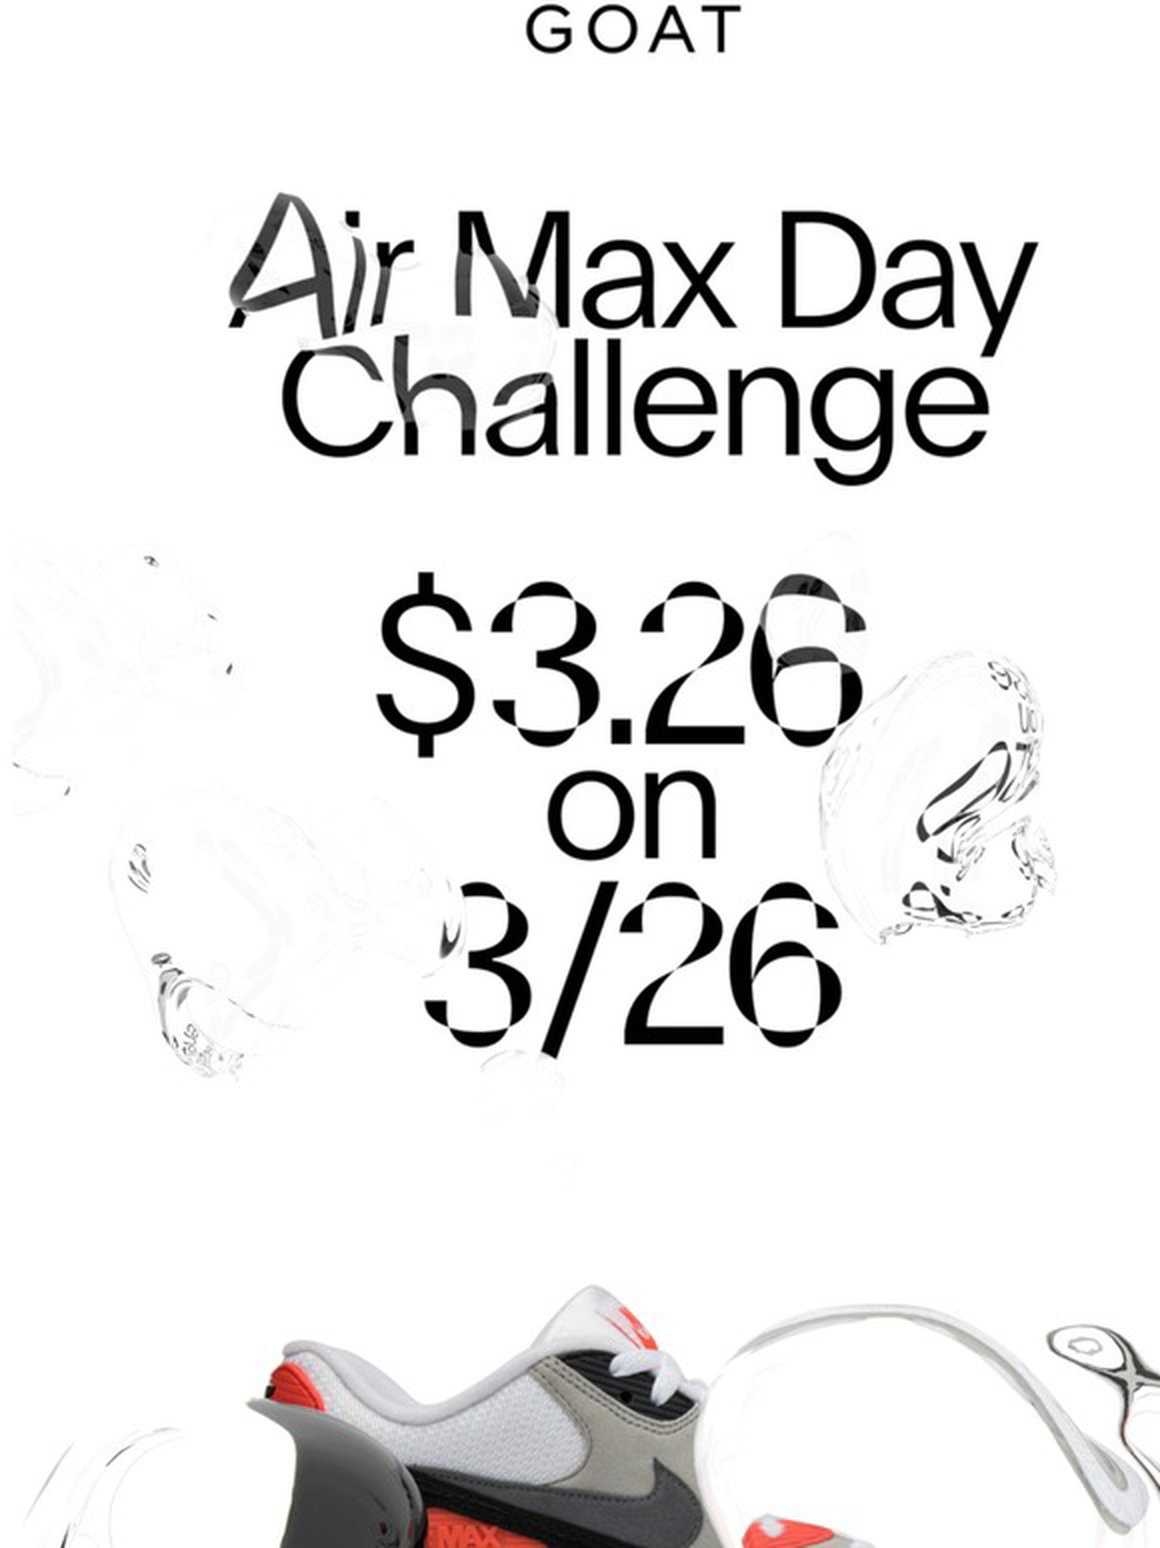 goat air max day challenge